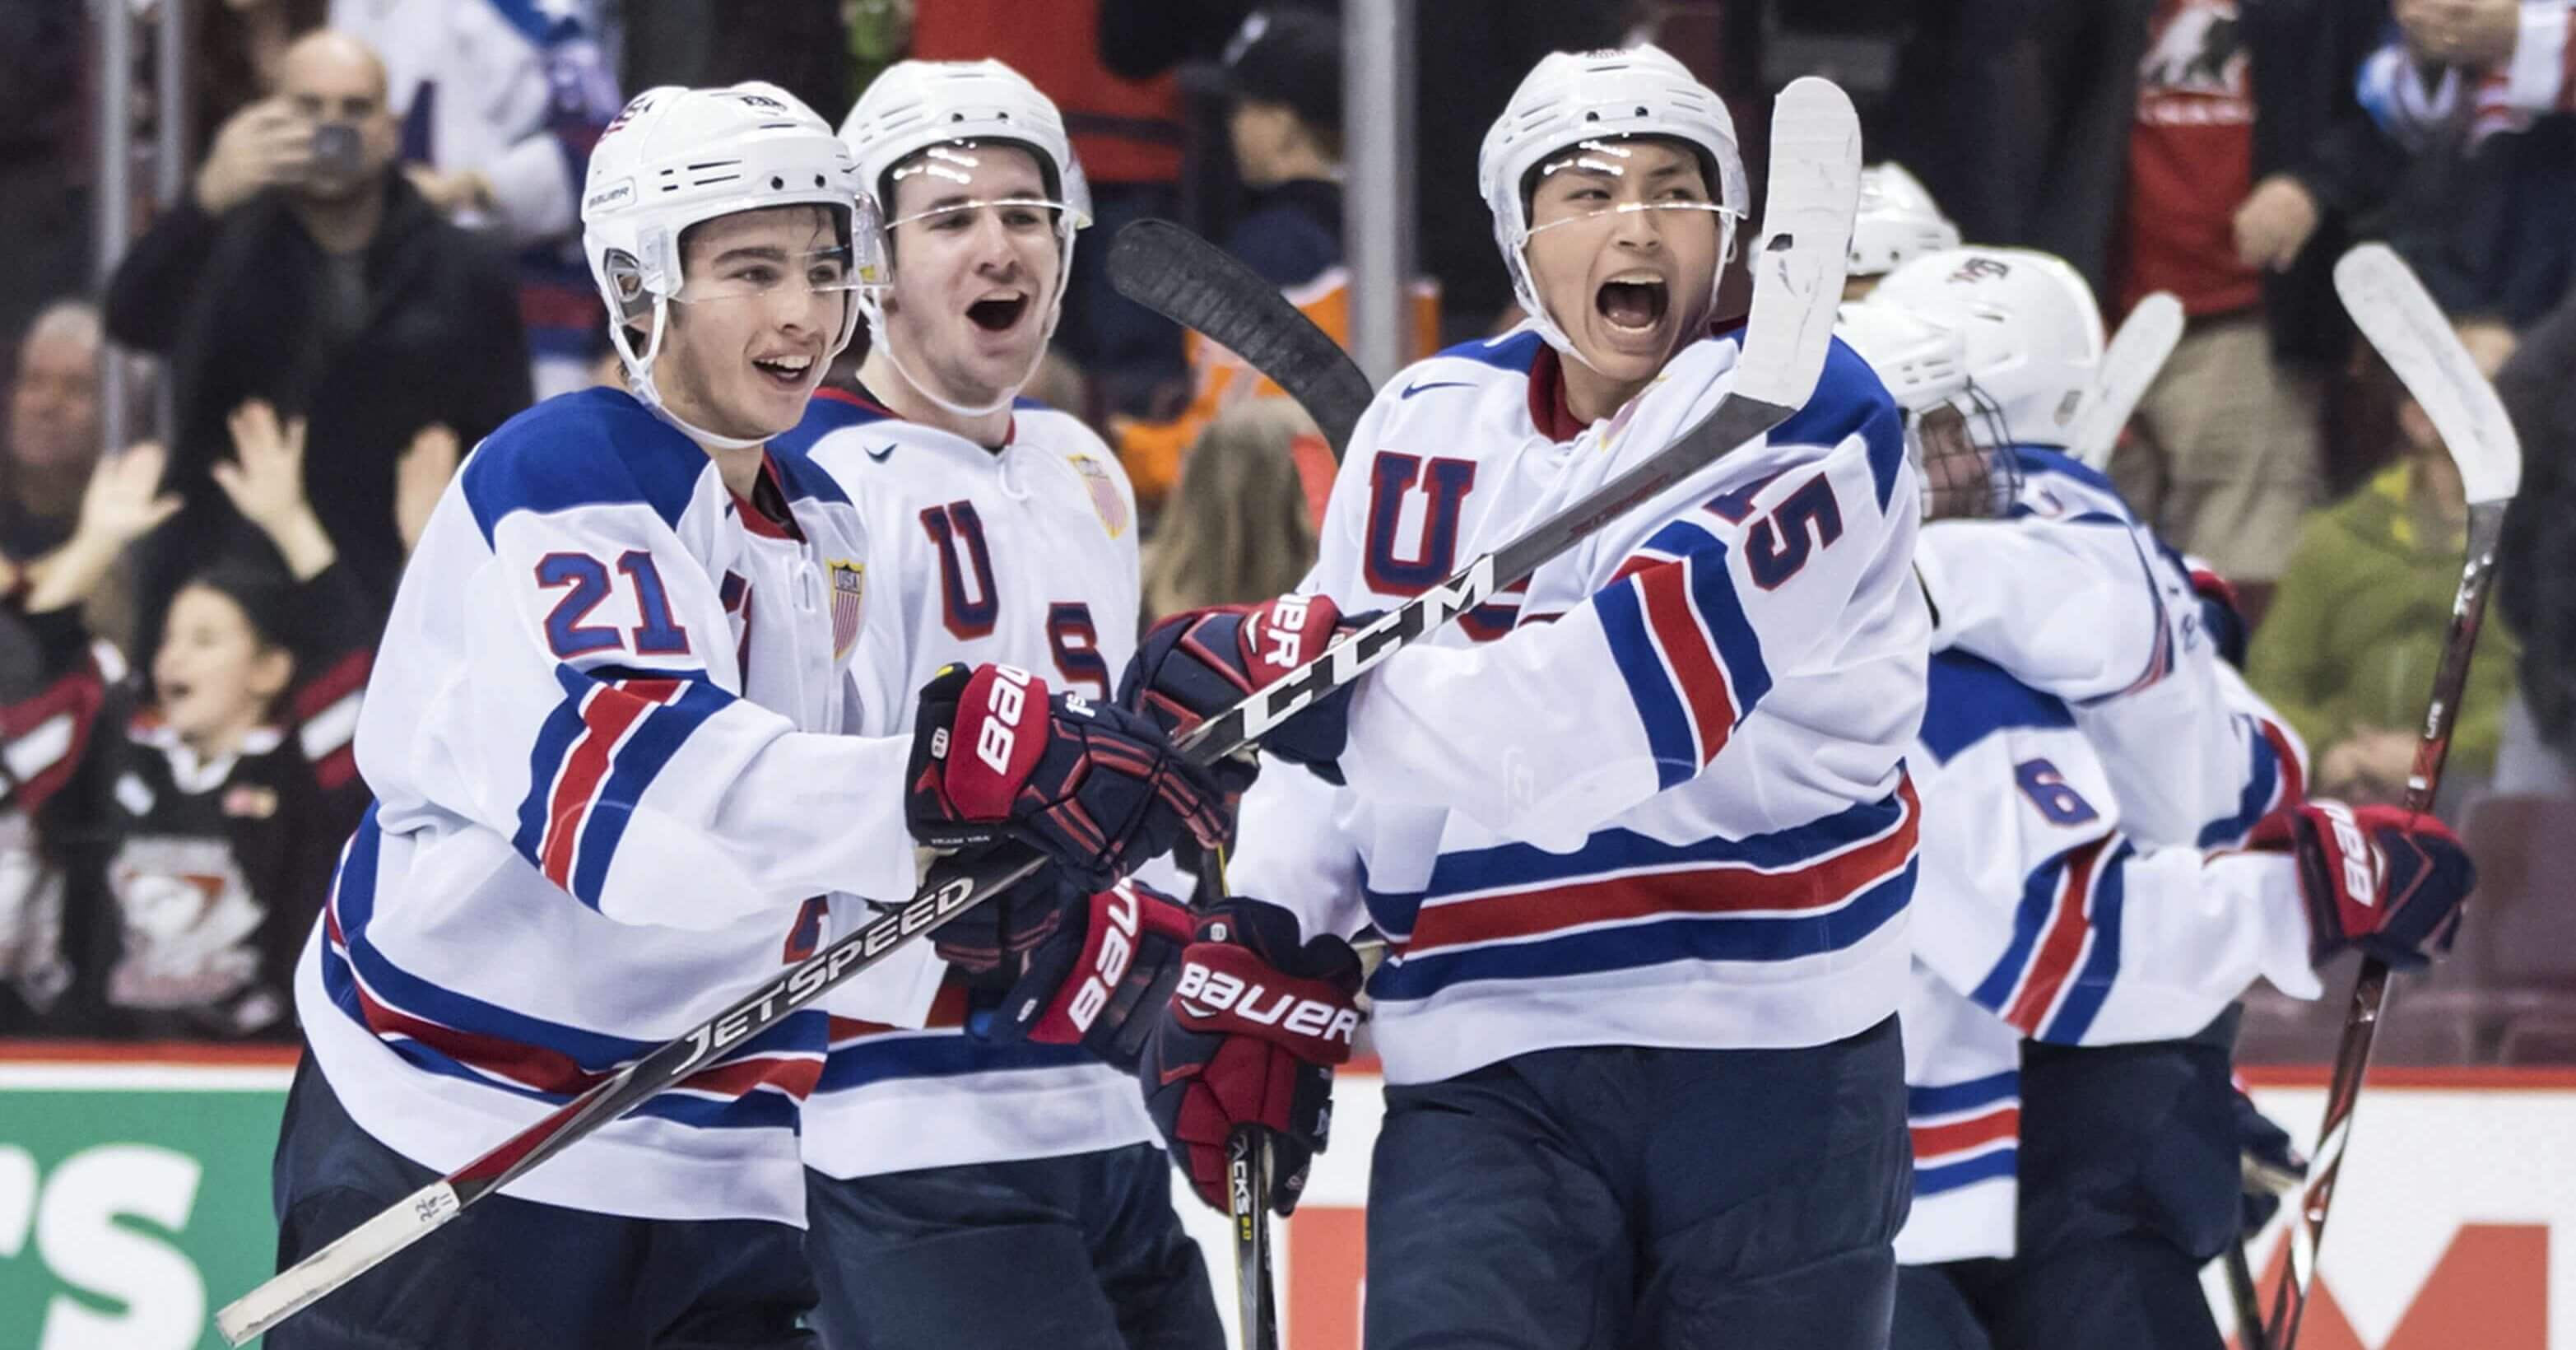 USA Hockey players Noah Cates, Mattias Samuelsson and Jason Robertson, from left, celebrate after defeating Russia in a world junior hockey championships semifinal in Vancouver, British Columbia, on Friday.